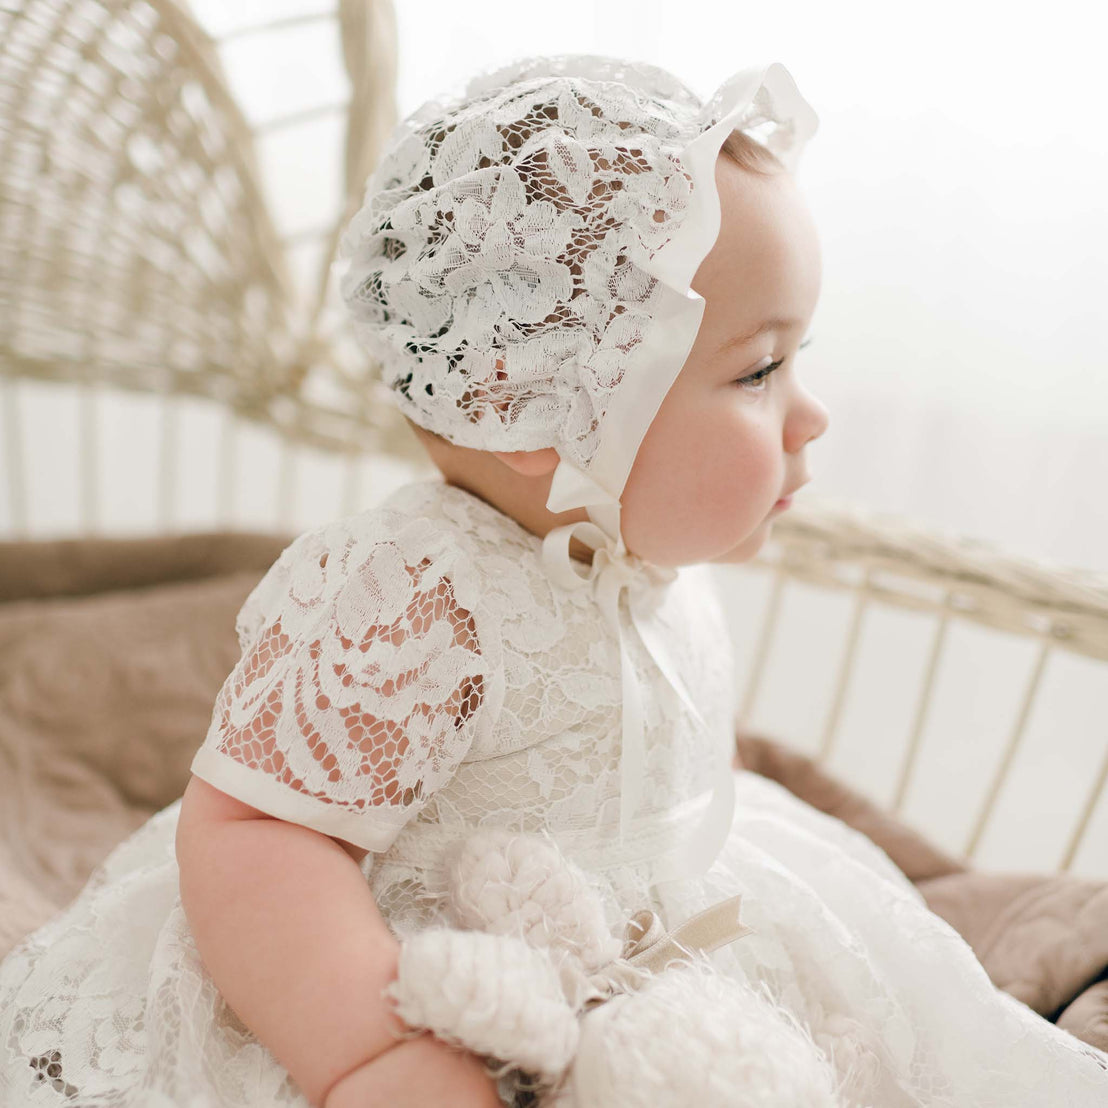 A baby wearing an elegant Rose Christening Gown & Bonnet sits in a rattan chair, gazing to the side with a soft expression.